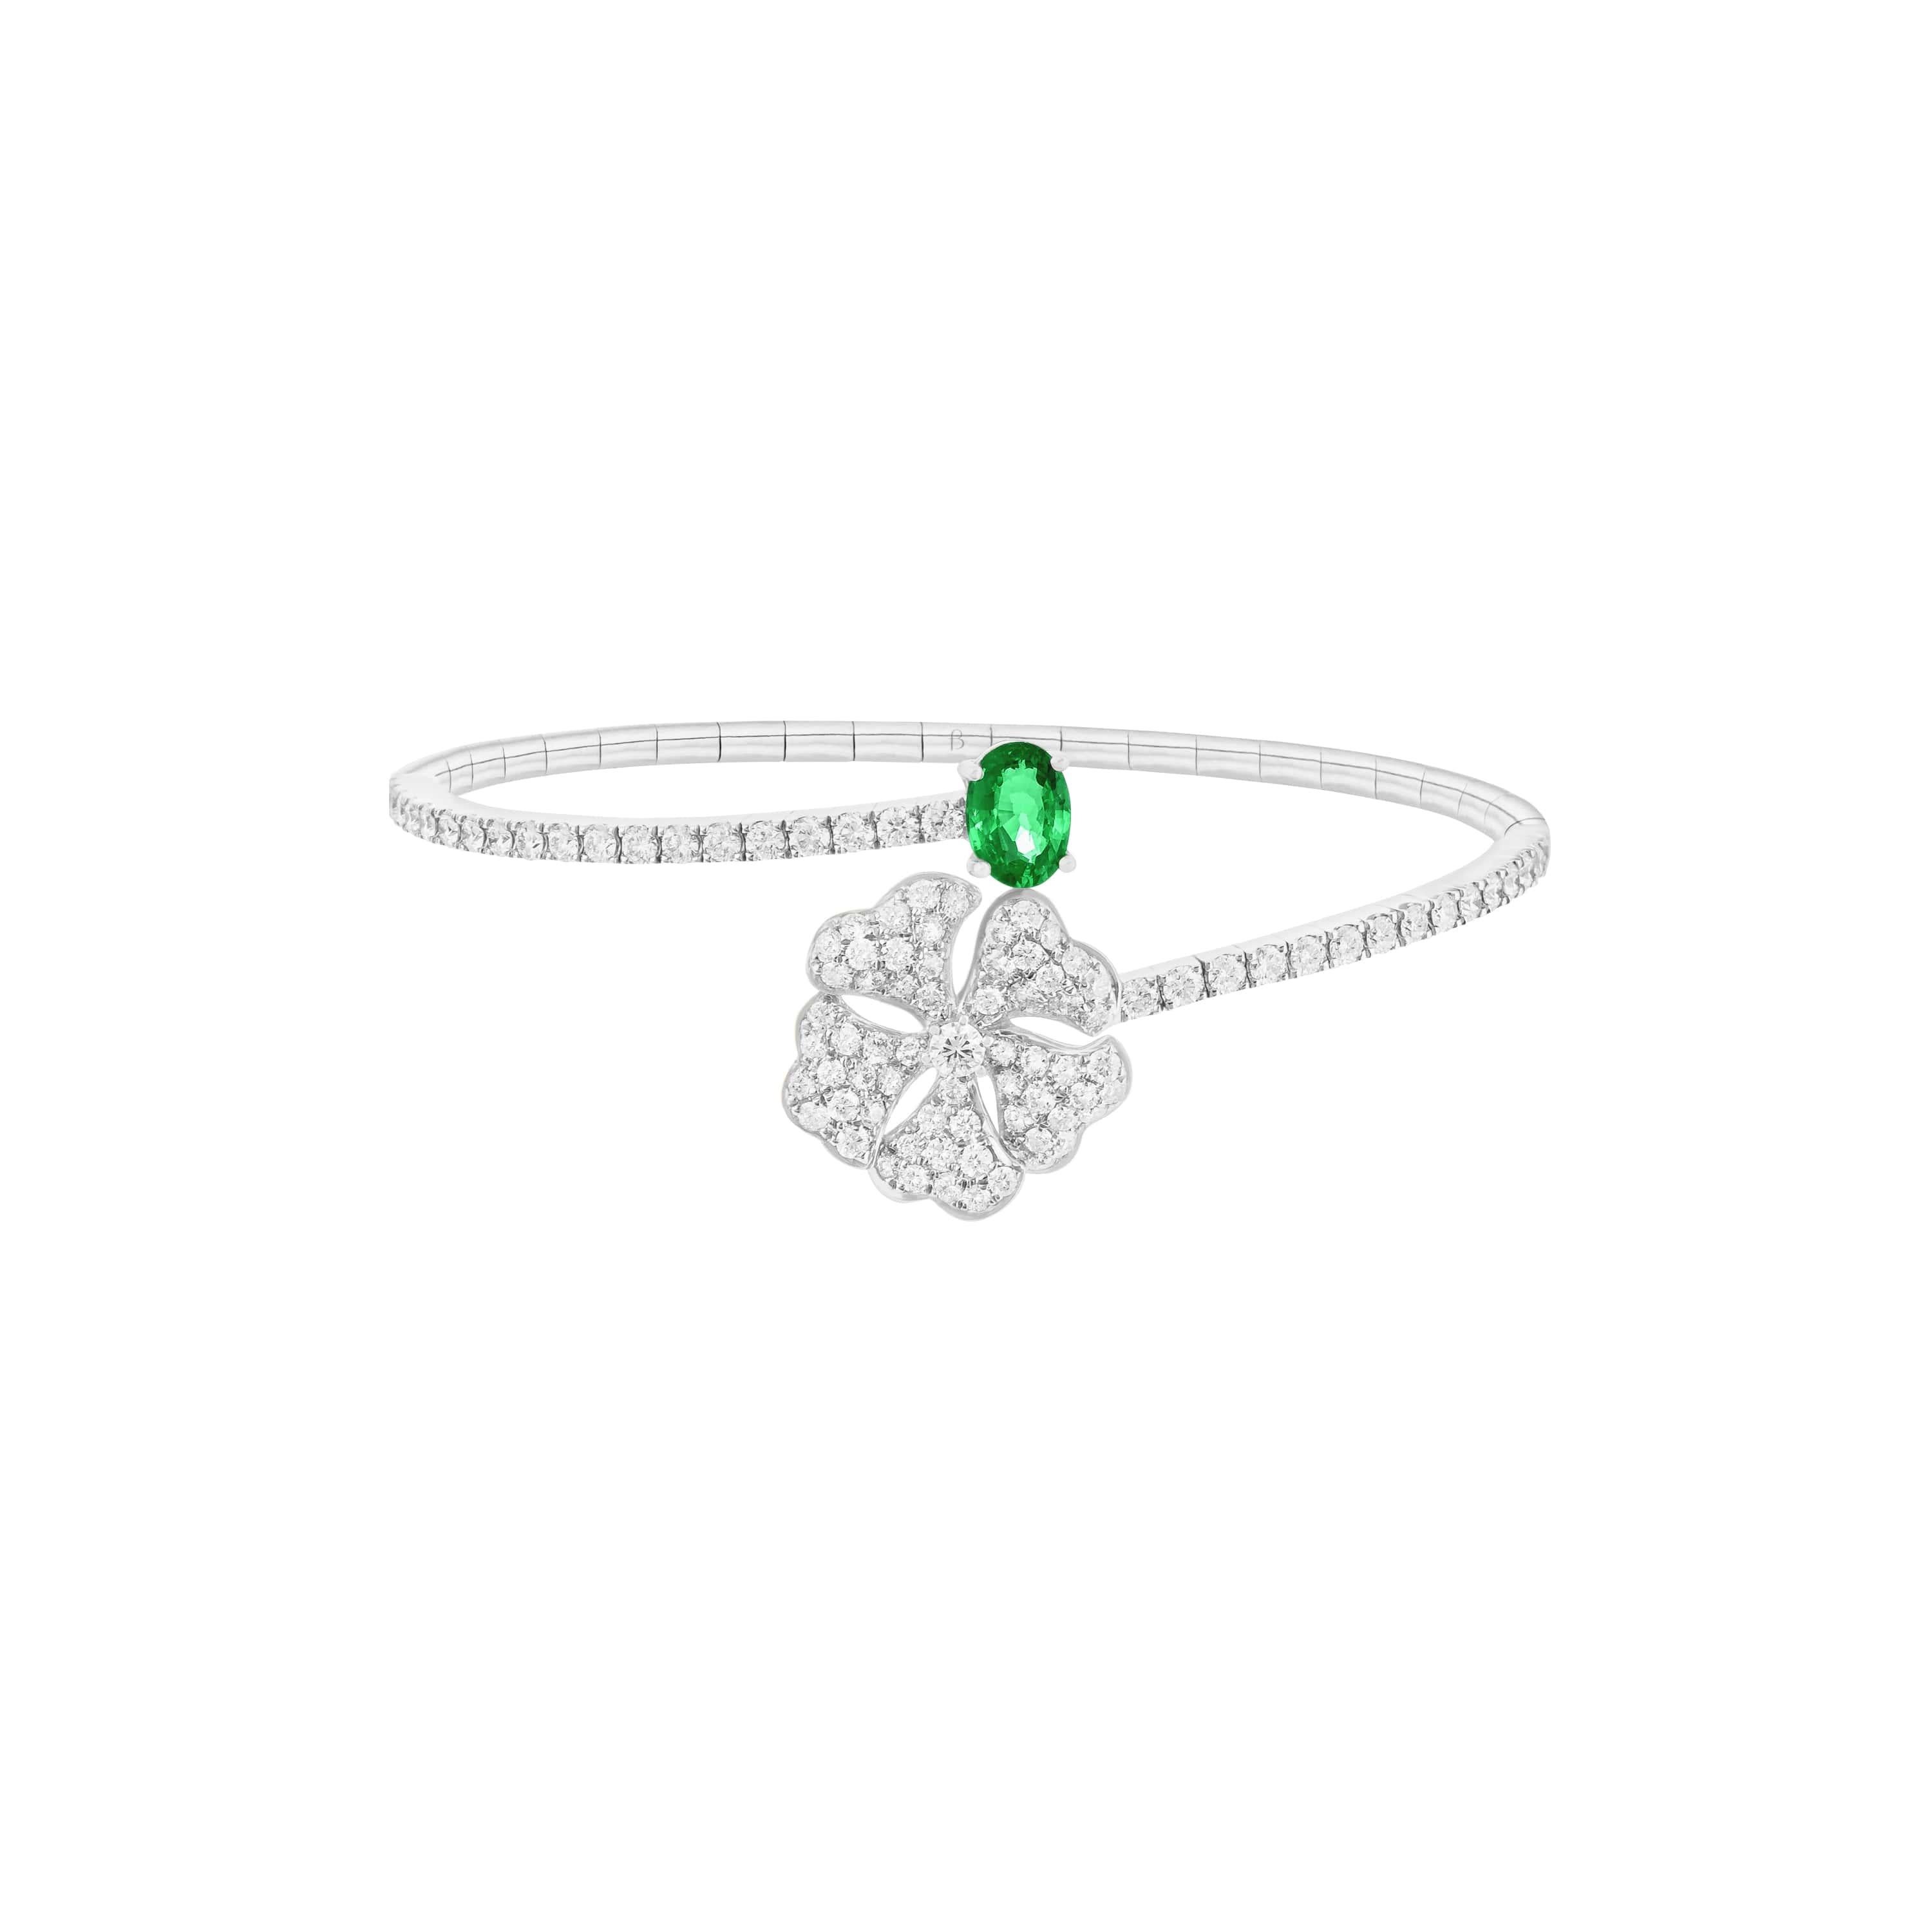 Bloom Emerald and Diamond Open Spiral Bangle in 18K White Gold

Inspired by the exquisite petals of the alpine cinquefoil flower, the Bloom collection combines the richness of diamonds and precious metals with the light versatility of this delicate,